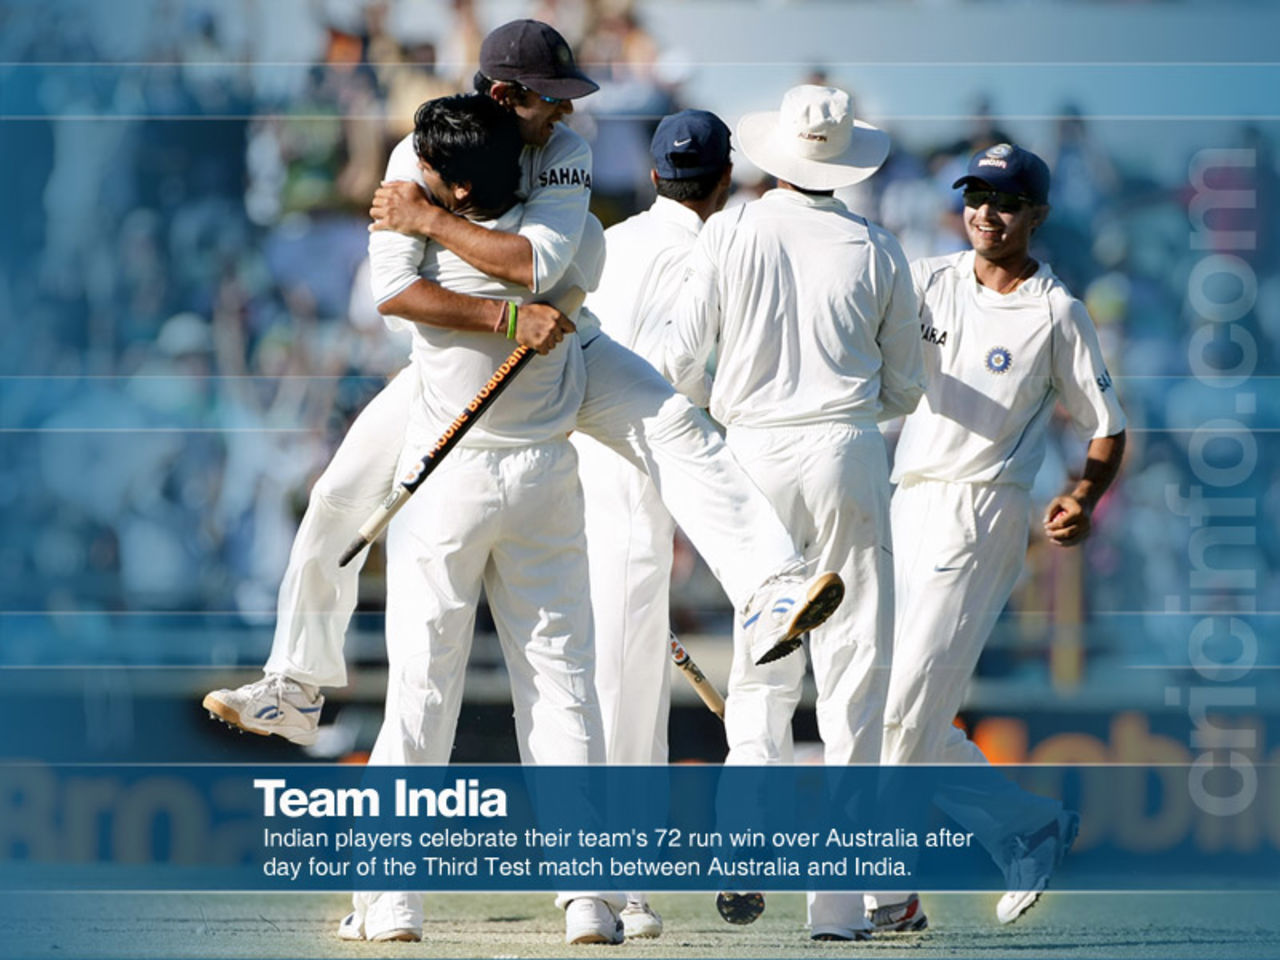 Team India after their historic Test win